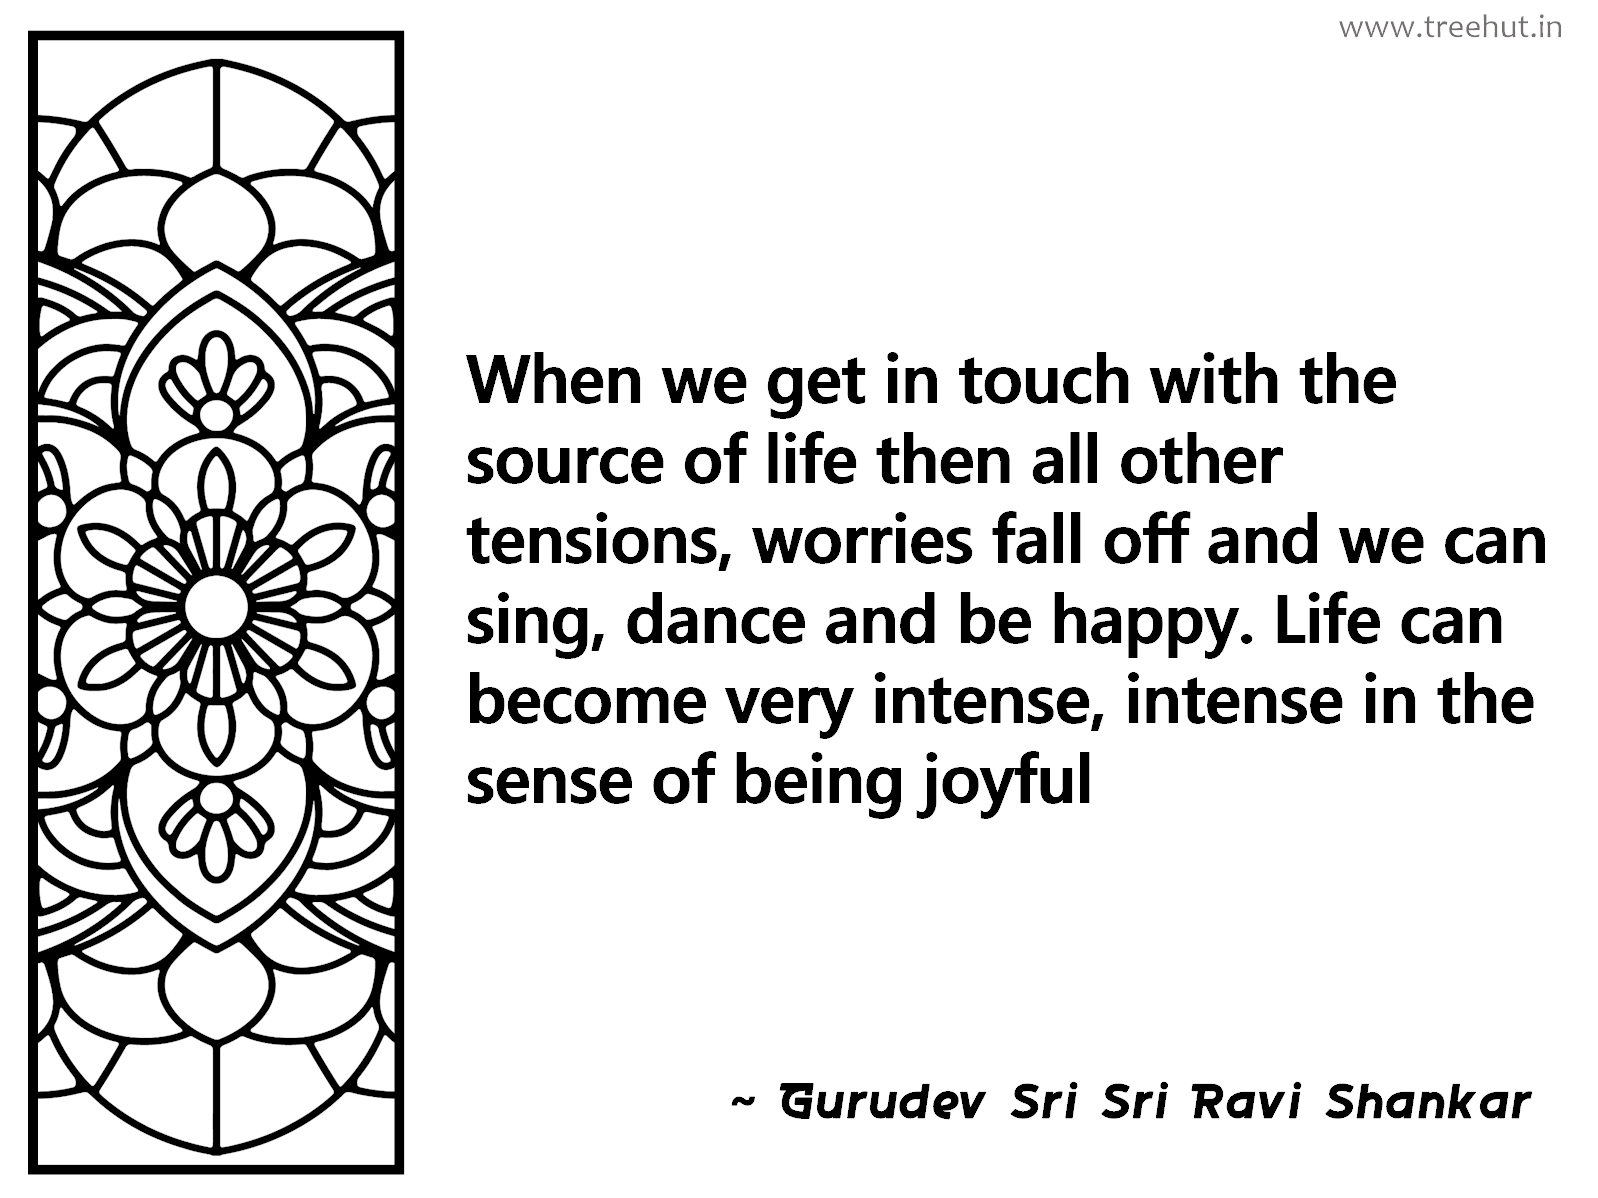 When we get in touch with the source of life then all other tensions, worries fall off and we can sing, dance and be happy. Life can become very intense, intense in the sense of being joyful Inspirational Quote by Gurudev Sri Sri Ravi Shankar, coloring pages